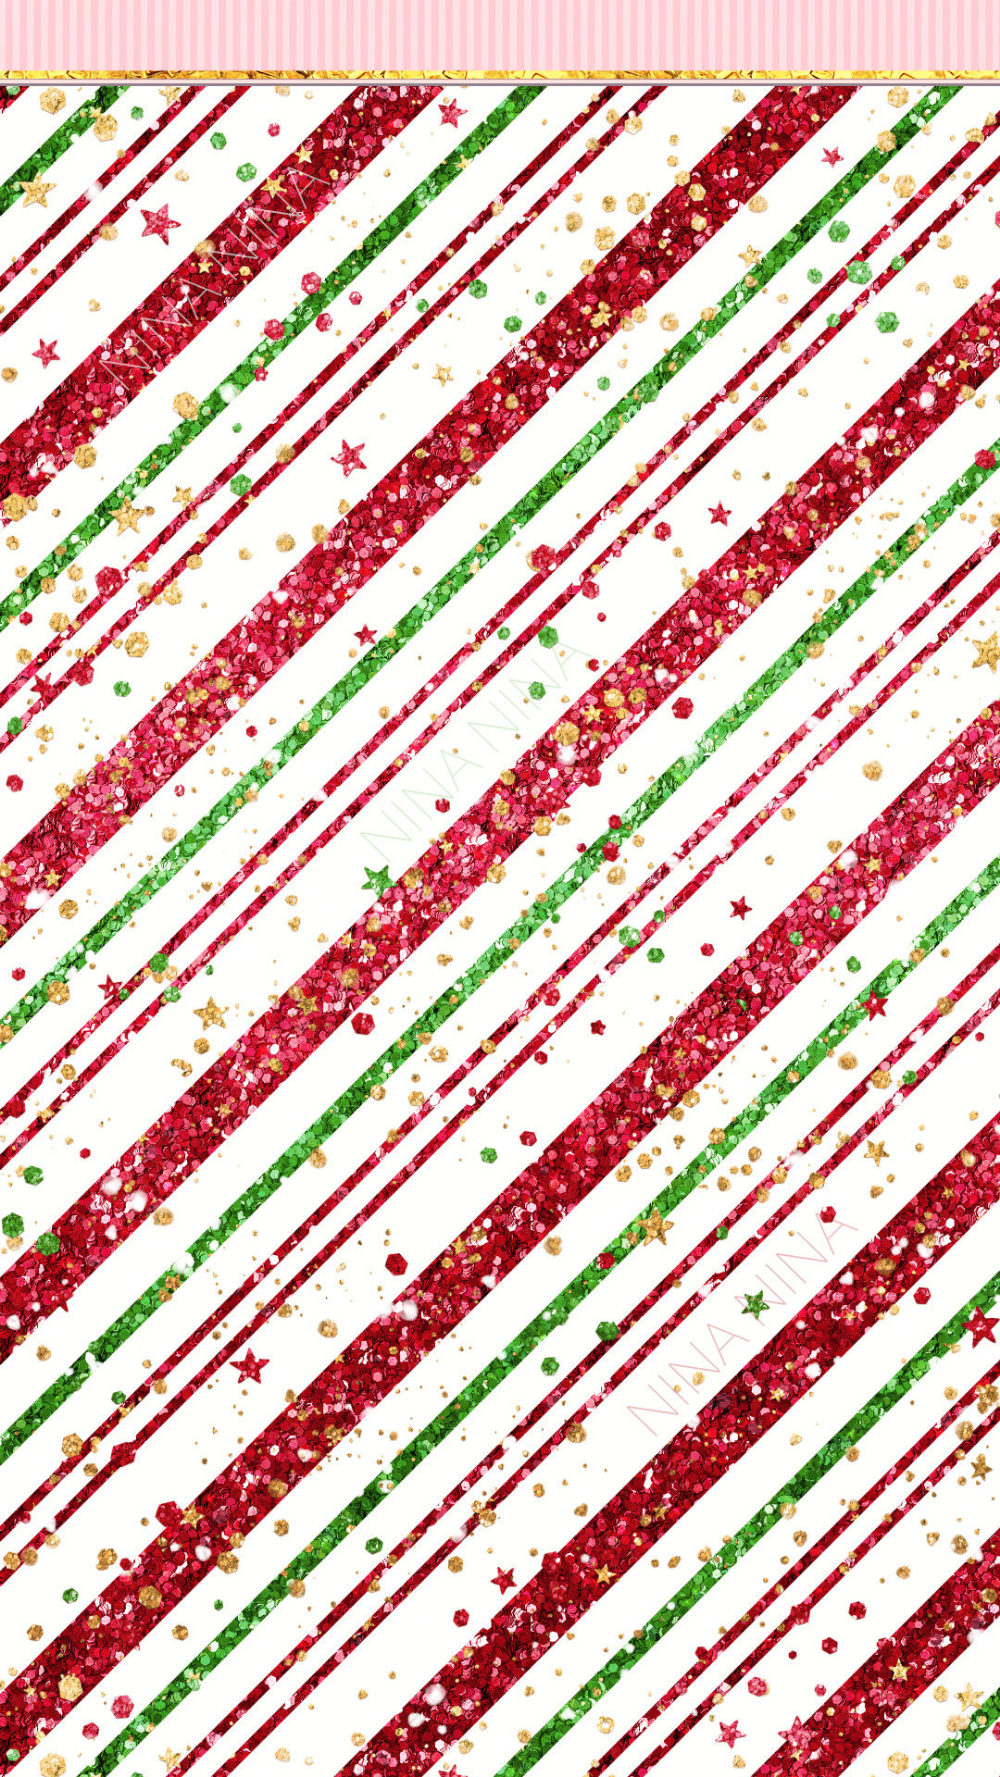 Christmas Gingerbread Digital Paper Pack, Basic Christmas Seamless Patterns, Glitter Stars, Candy Cane Stripes, Cute Xmas Fabric, Red, Gold. Wallpaper iphone christmas, Christmas phone wallpaper, Cute christmas wallpaper